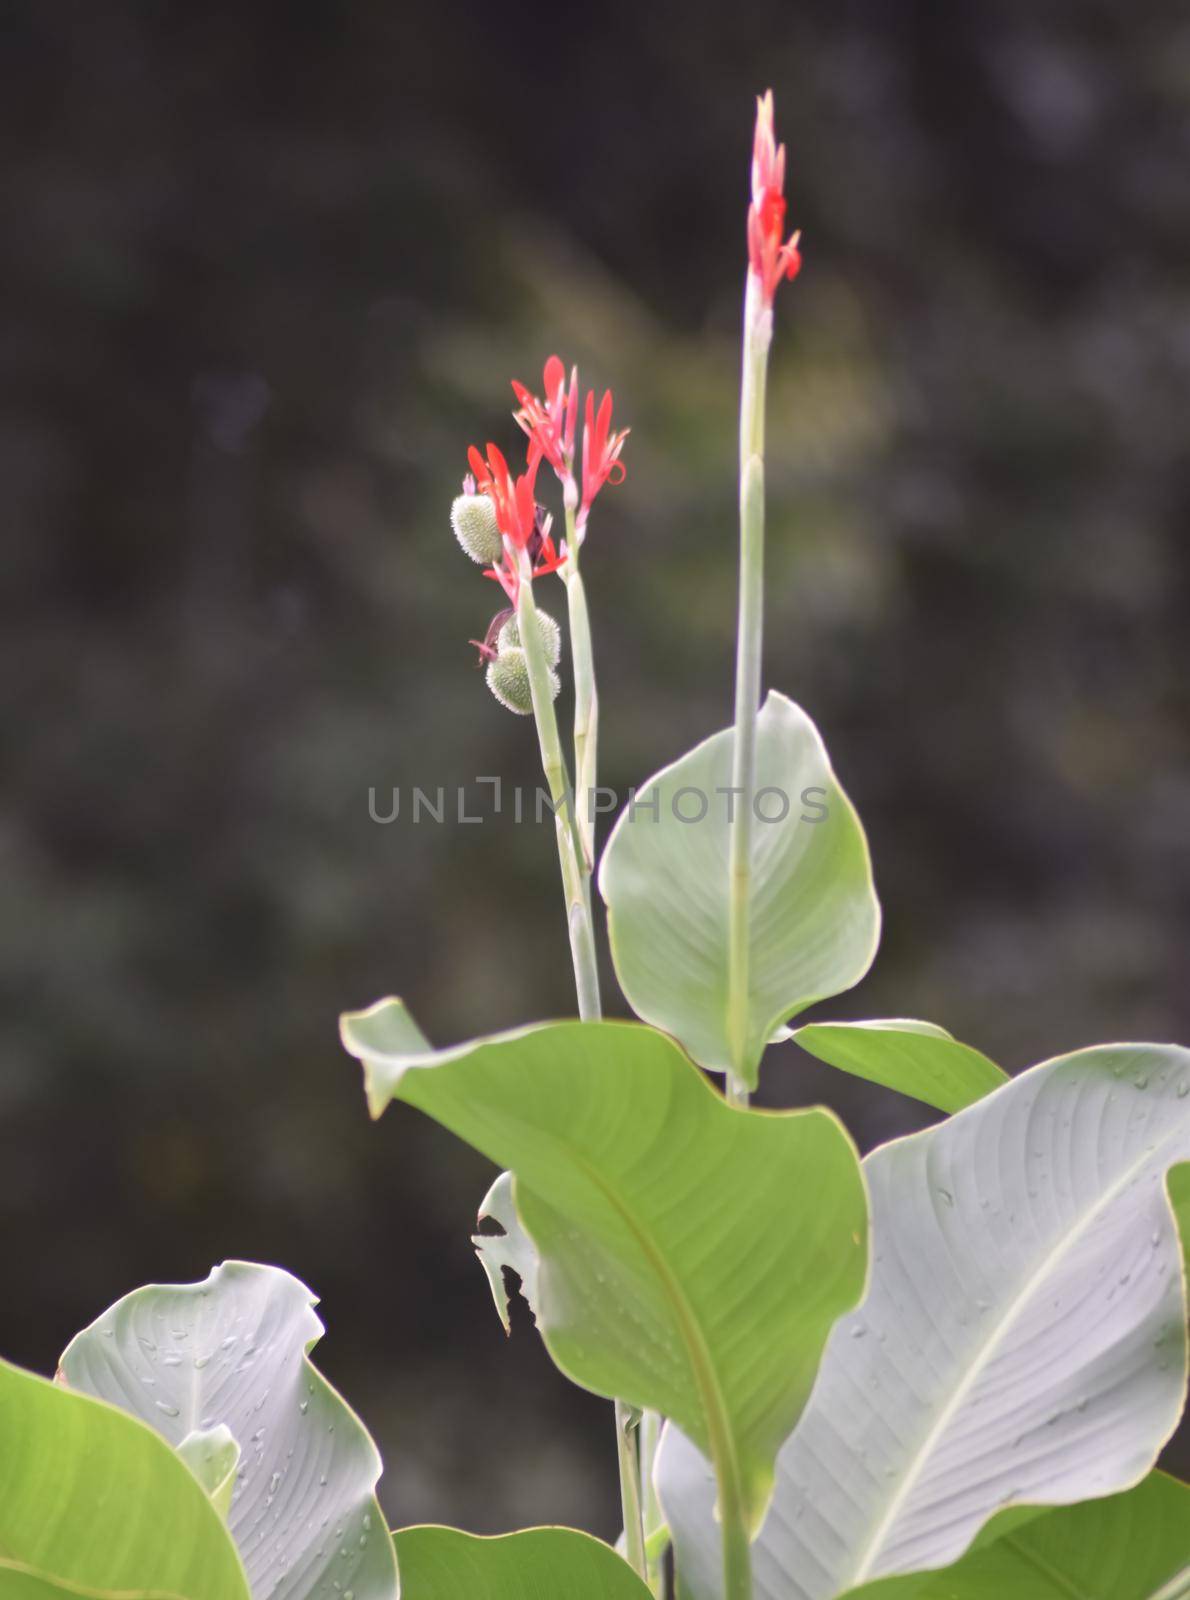 Red flower with big green leaves, Indian shot or African arrowroot, Sierra Leone arrowroot,canna, cannaceae, canna lily, Flowers at the park, nature background by tabishere